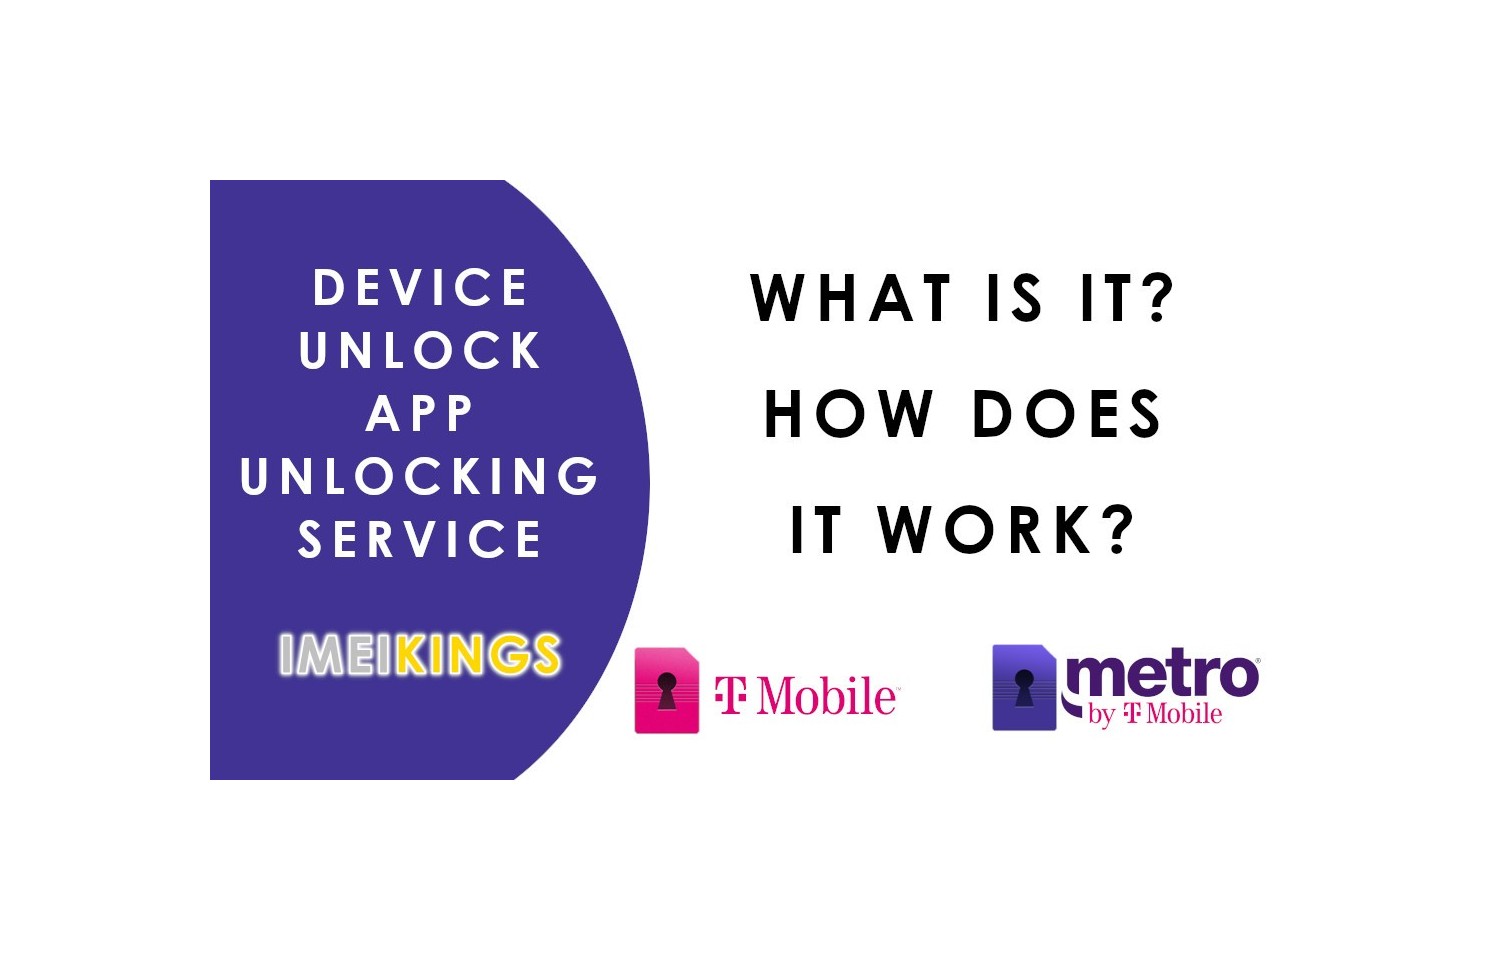 How to Unlock Your Phone with the Device Unlock App